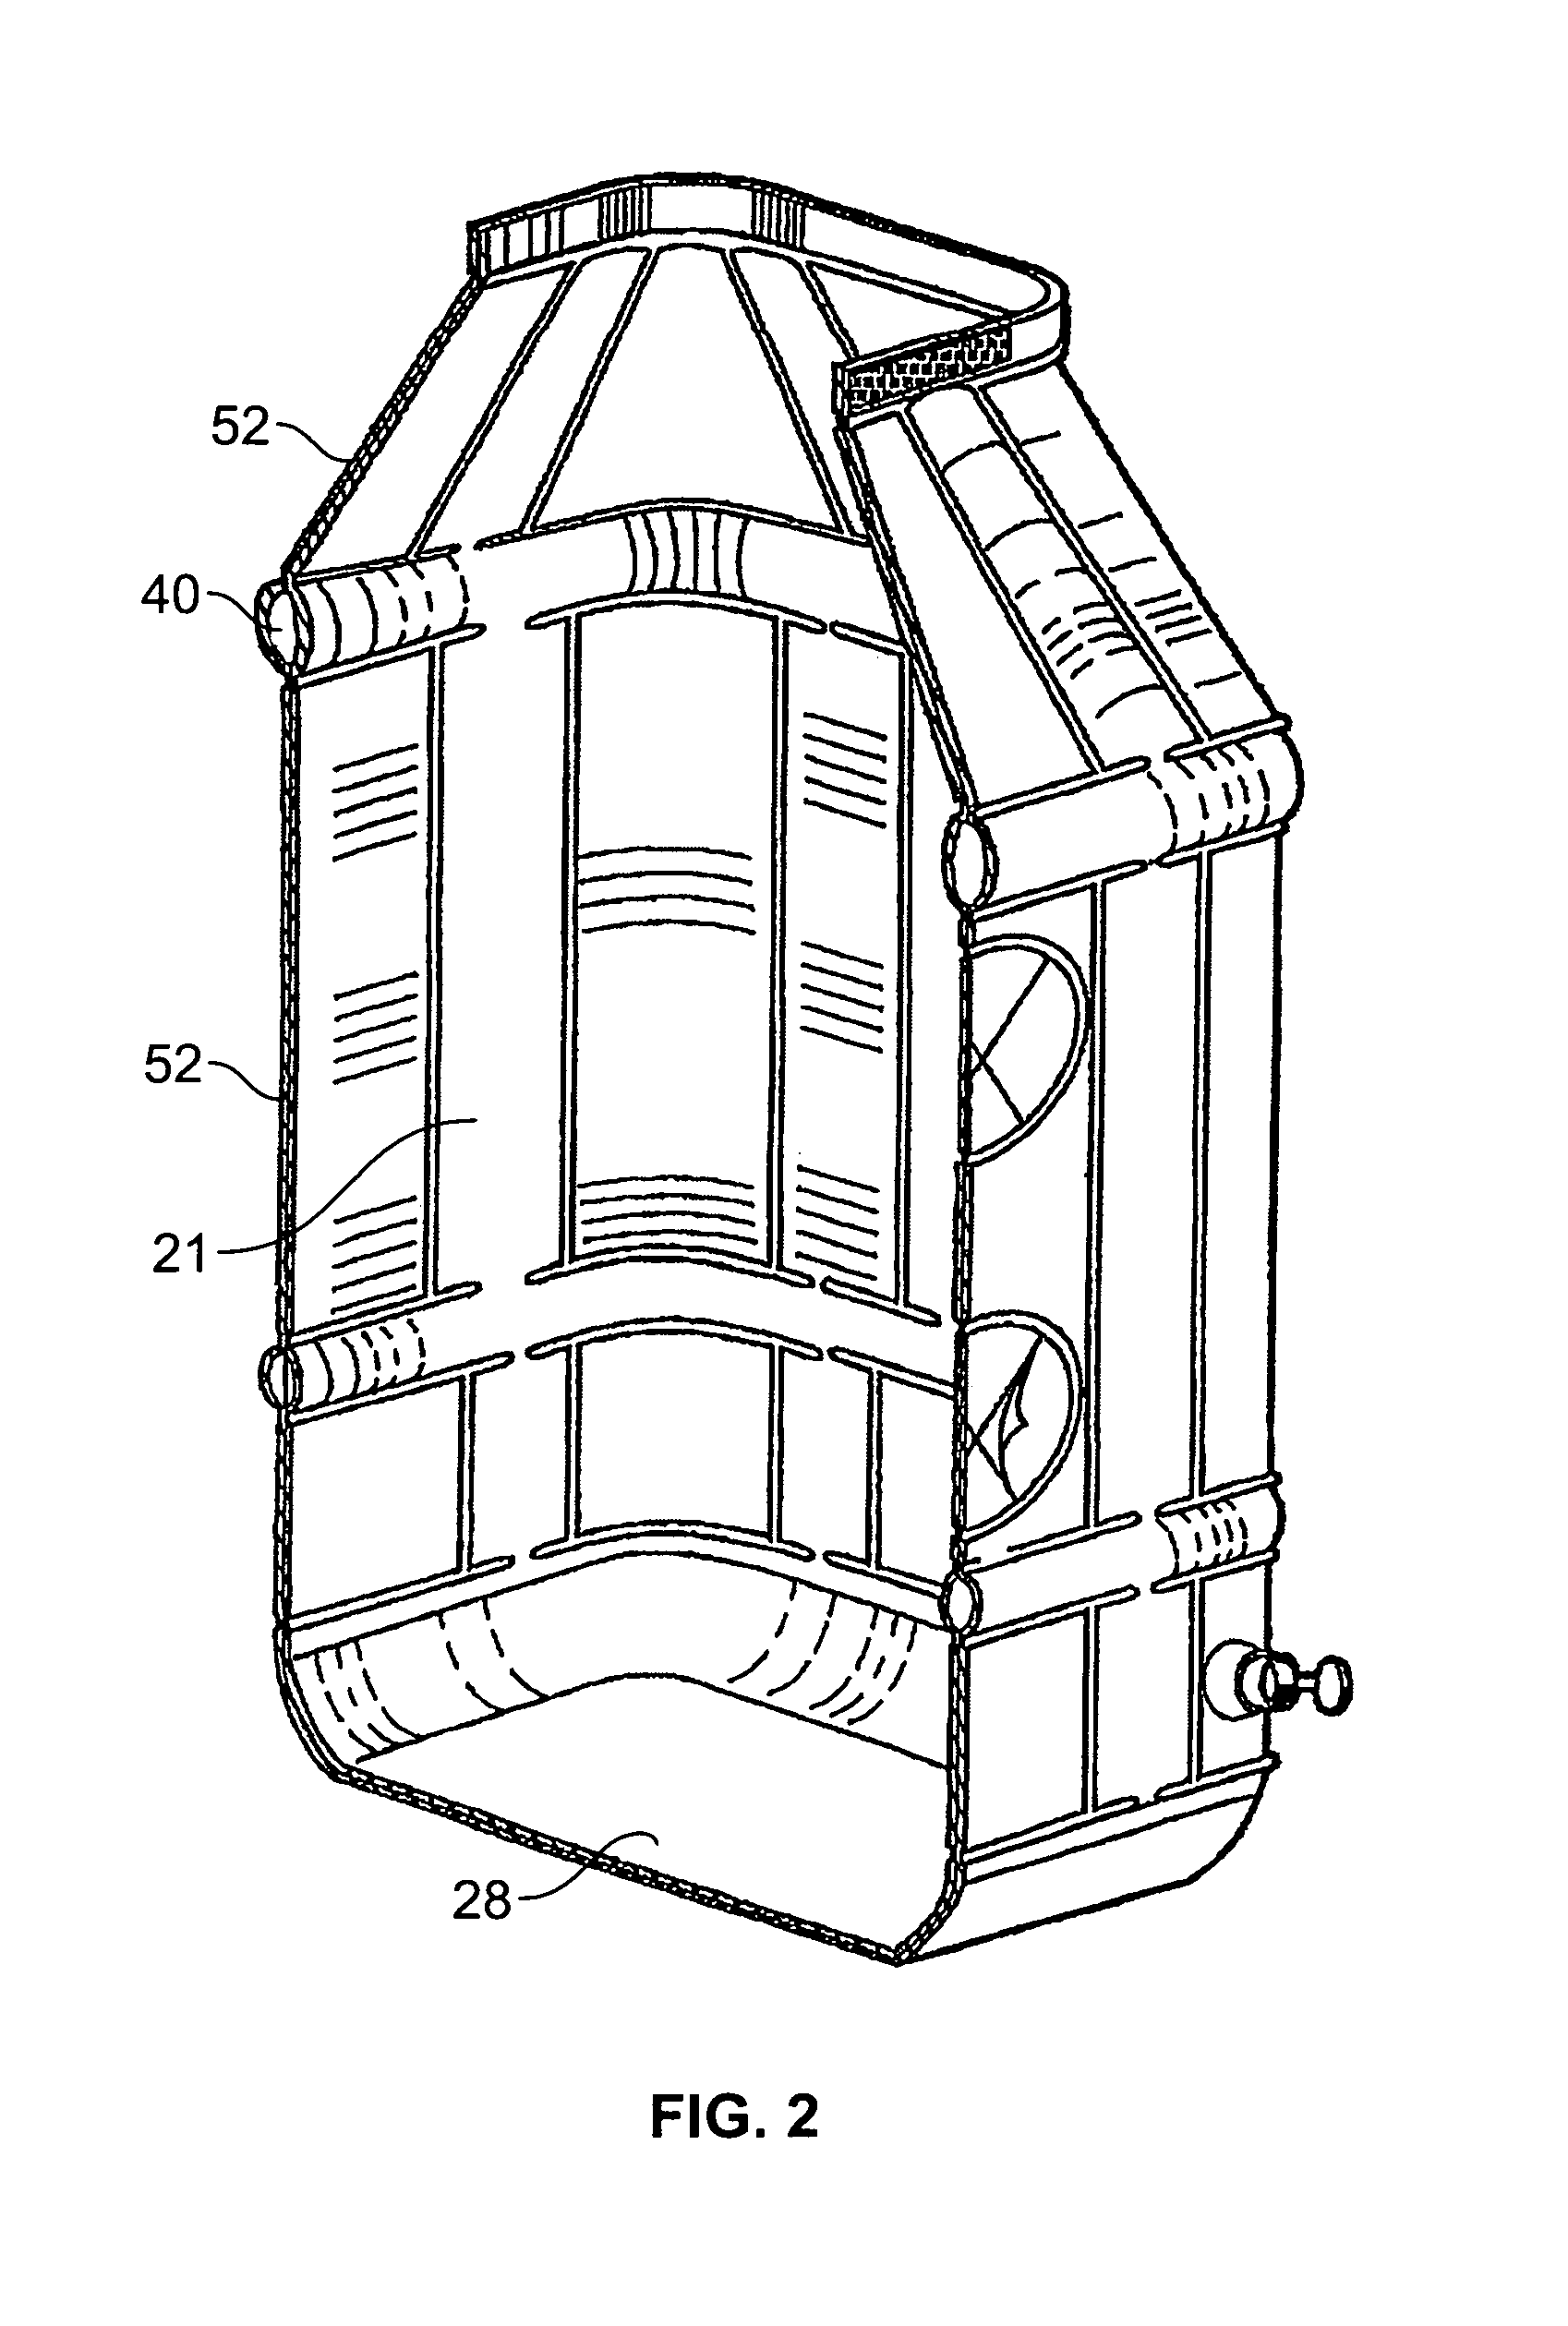 Fluid containment device